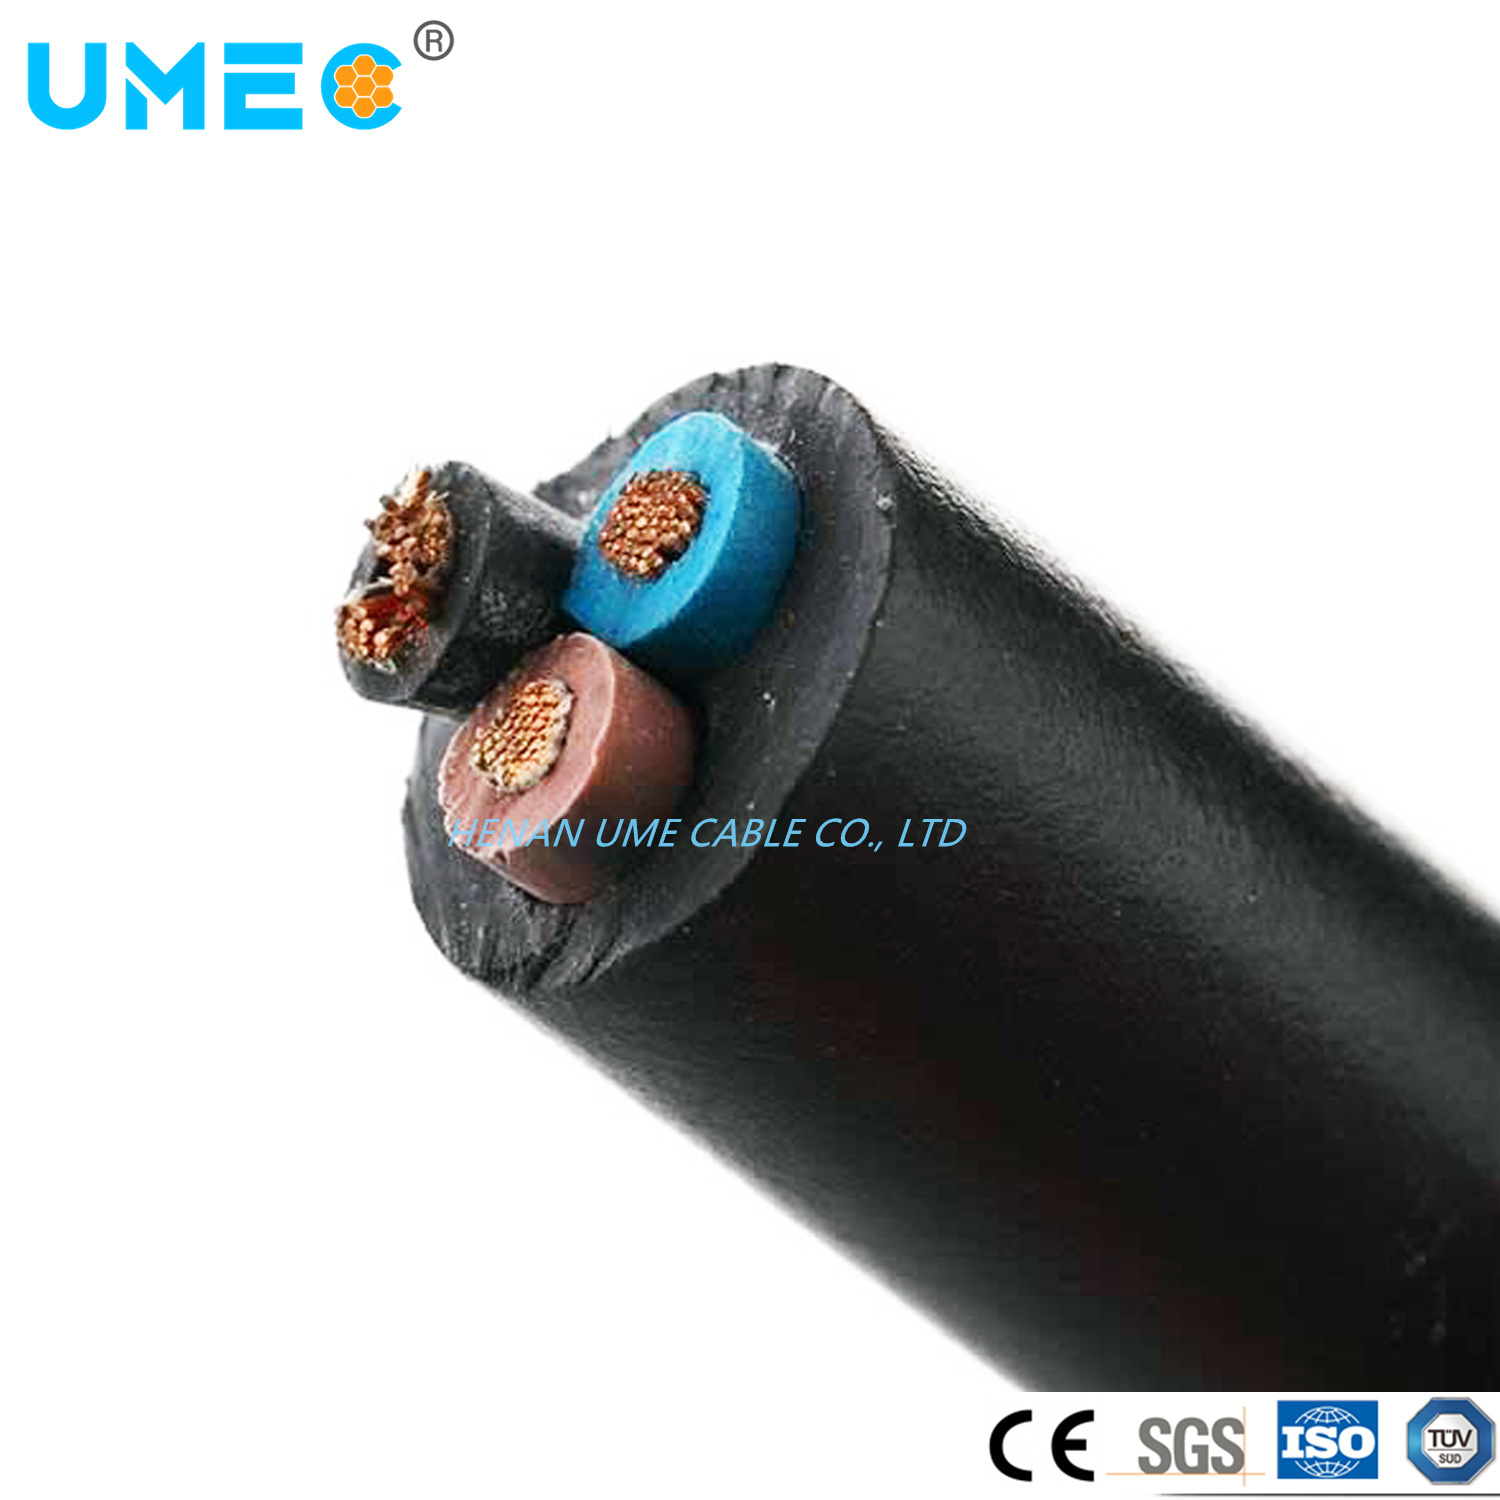 Universal General Rubber Insulated Flexible Cable Wire 300/500V 450/750V 3core 4core H07rnf Cable Wire